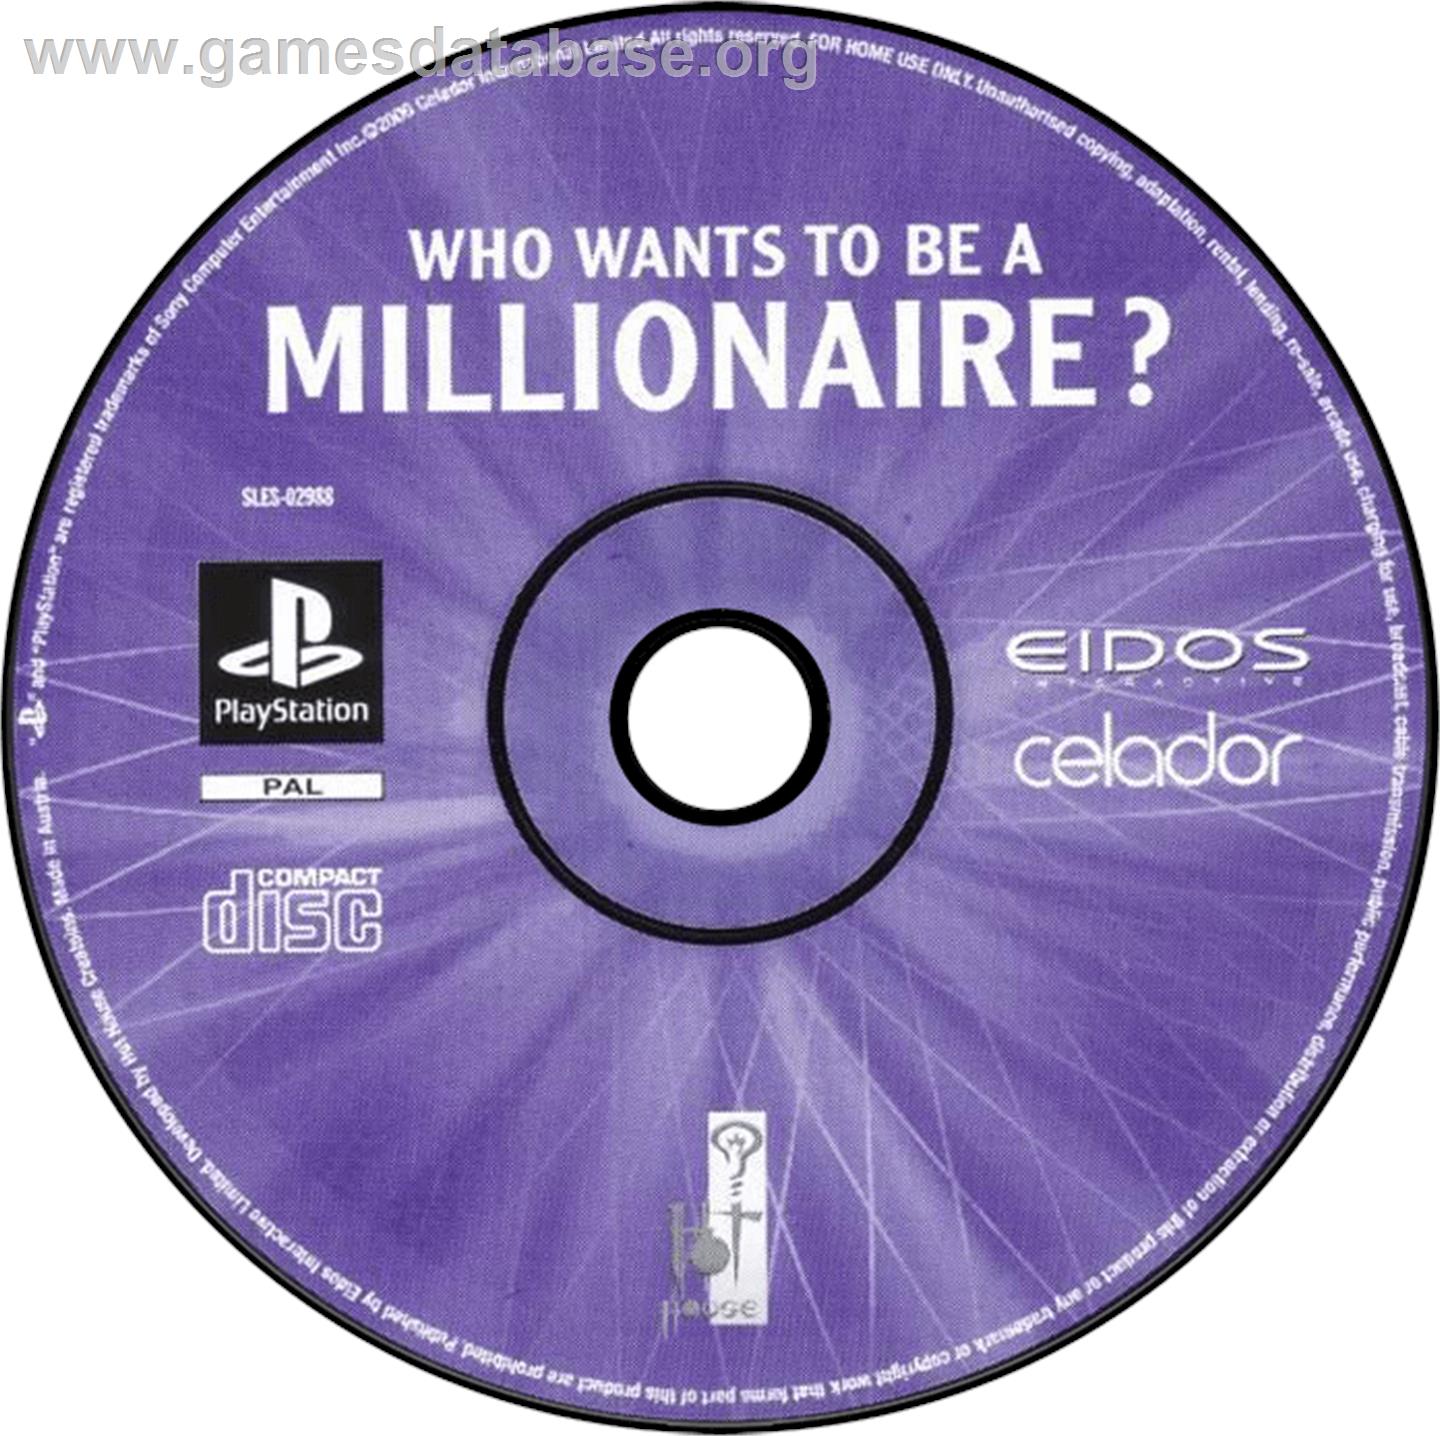 Who Wants to Be a Millionaire: Second Edition - Sony Playstation - Artwork - Disc